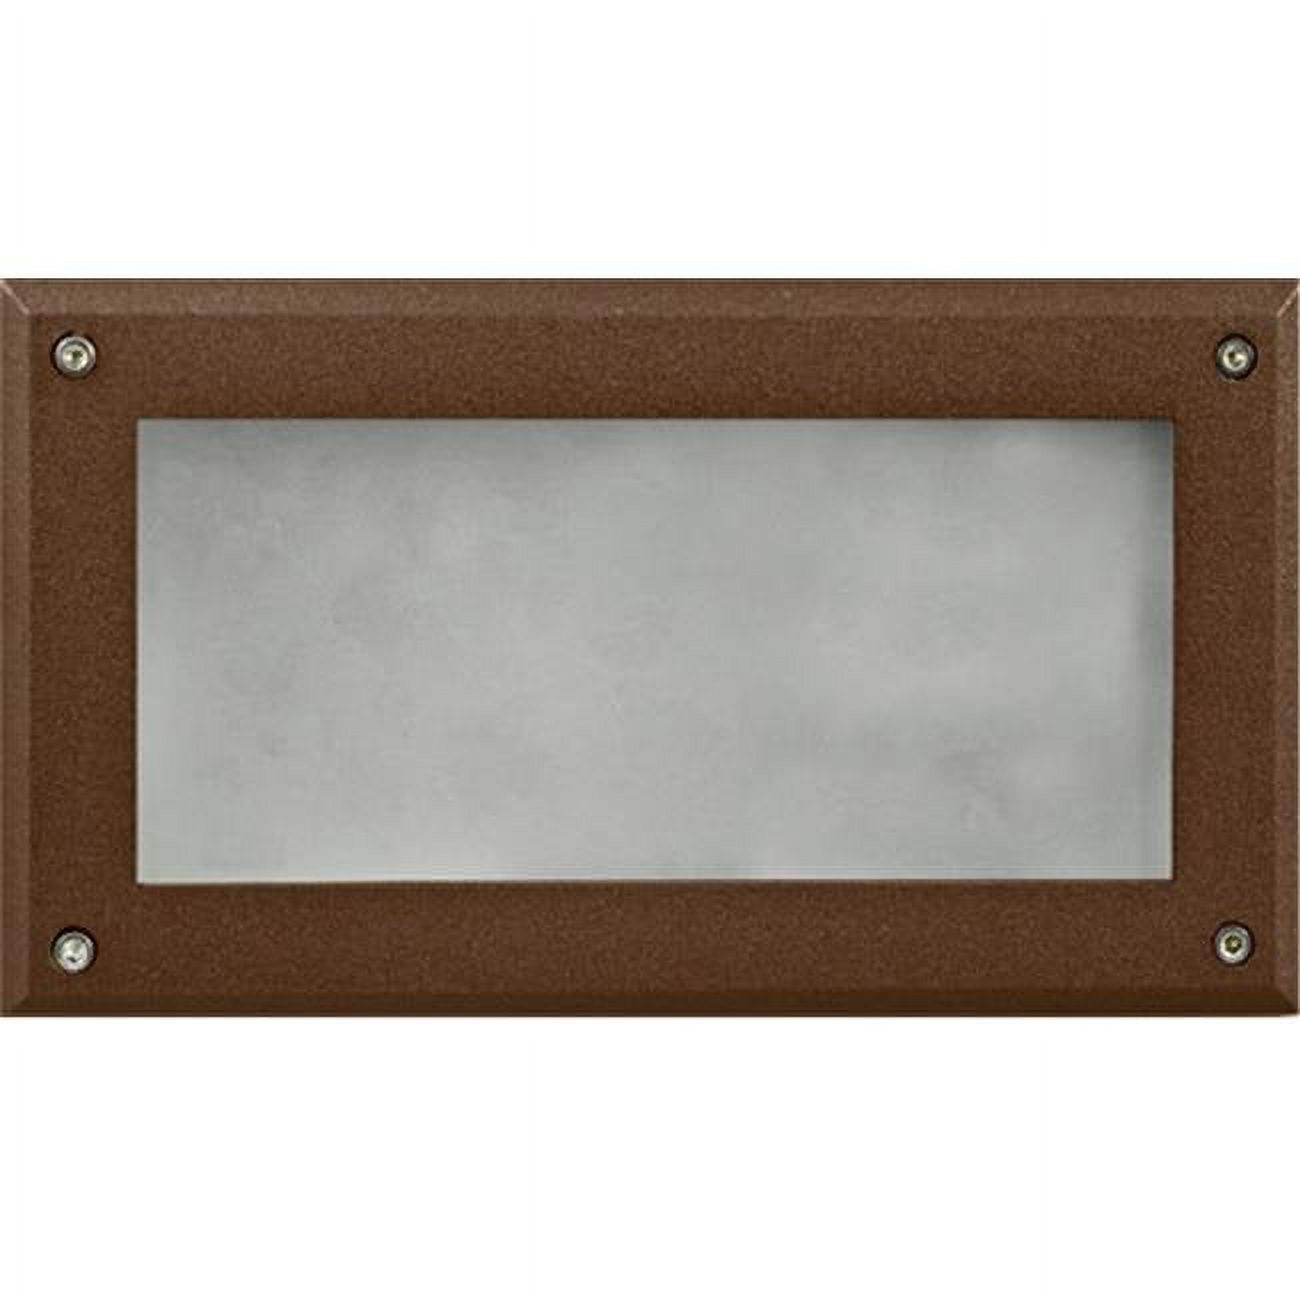 Dabmar Lighting DSL1001-BZ Recessed Open Face Brick, Step & Wall Light, Bronze - 5 x 8.90 x 3.15 in. - image 1 of 1